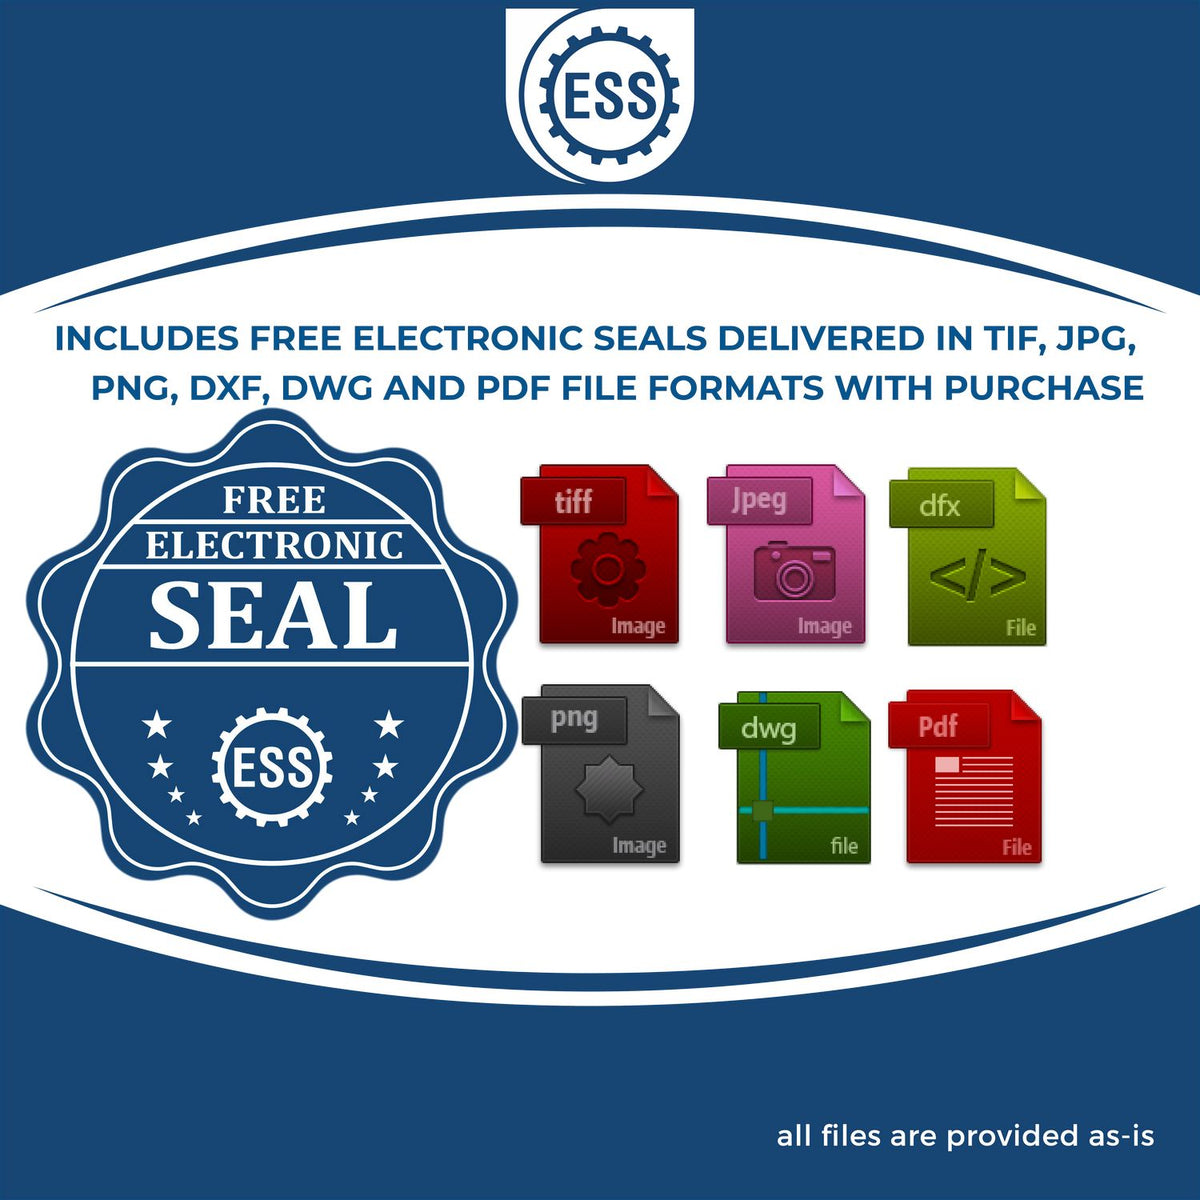 An infographic for the free electronic seal for the Hybrid Utah Landscape Architect Seal illustrating the different file type icons such as DXF, DWG, TIF, JPG and PNG.